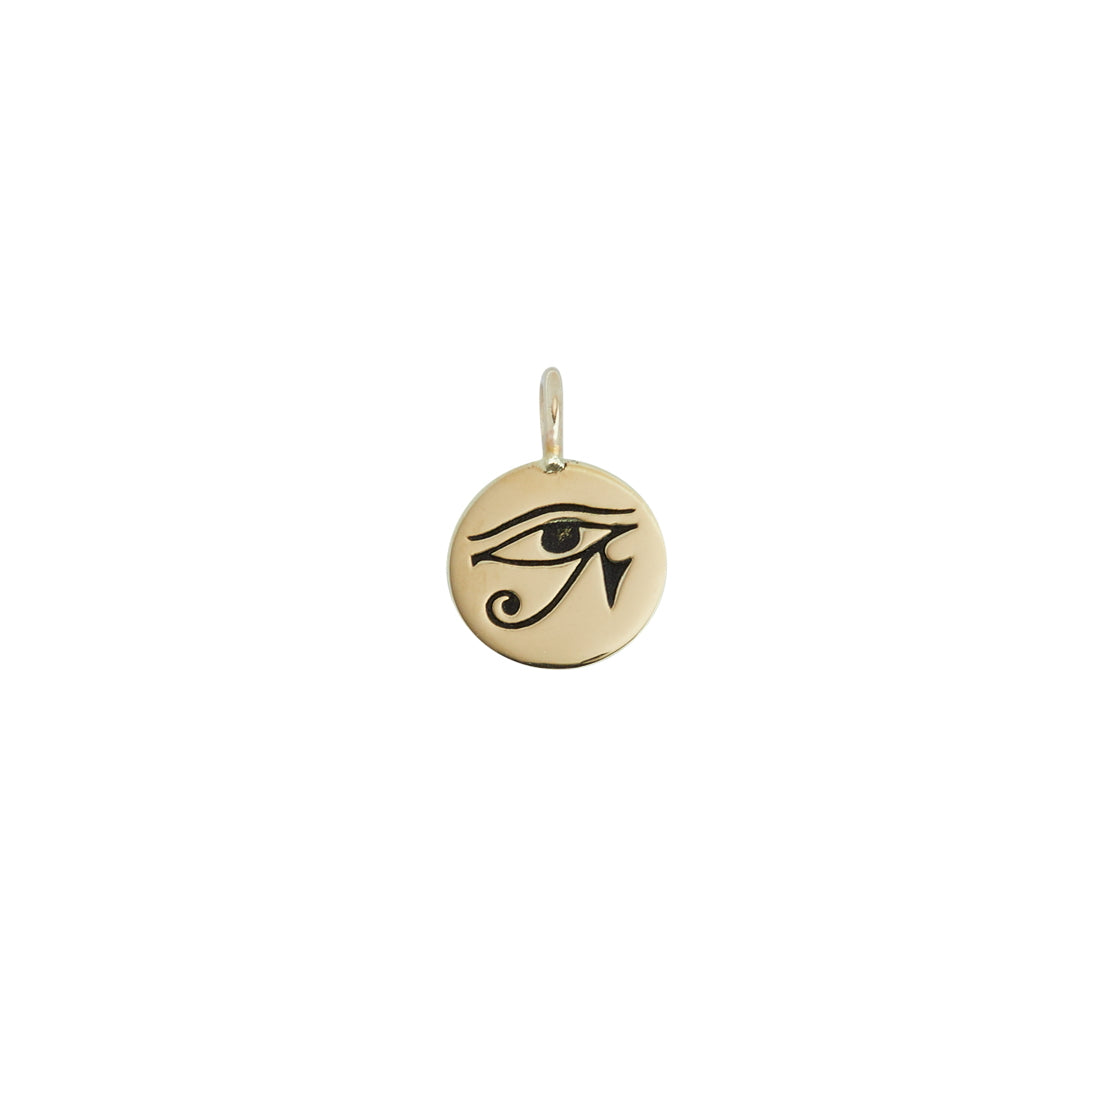 The 8mm Coin Necklace